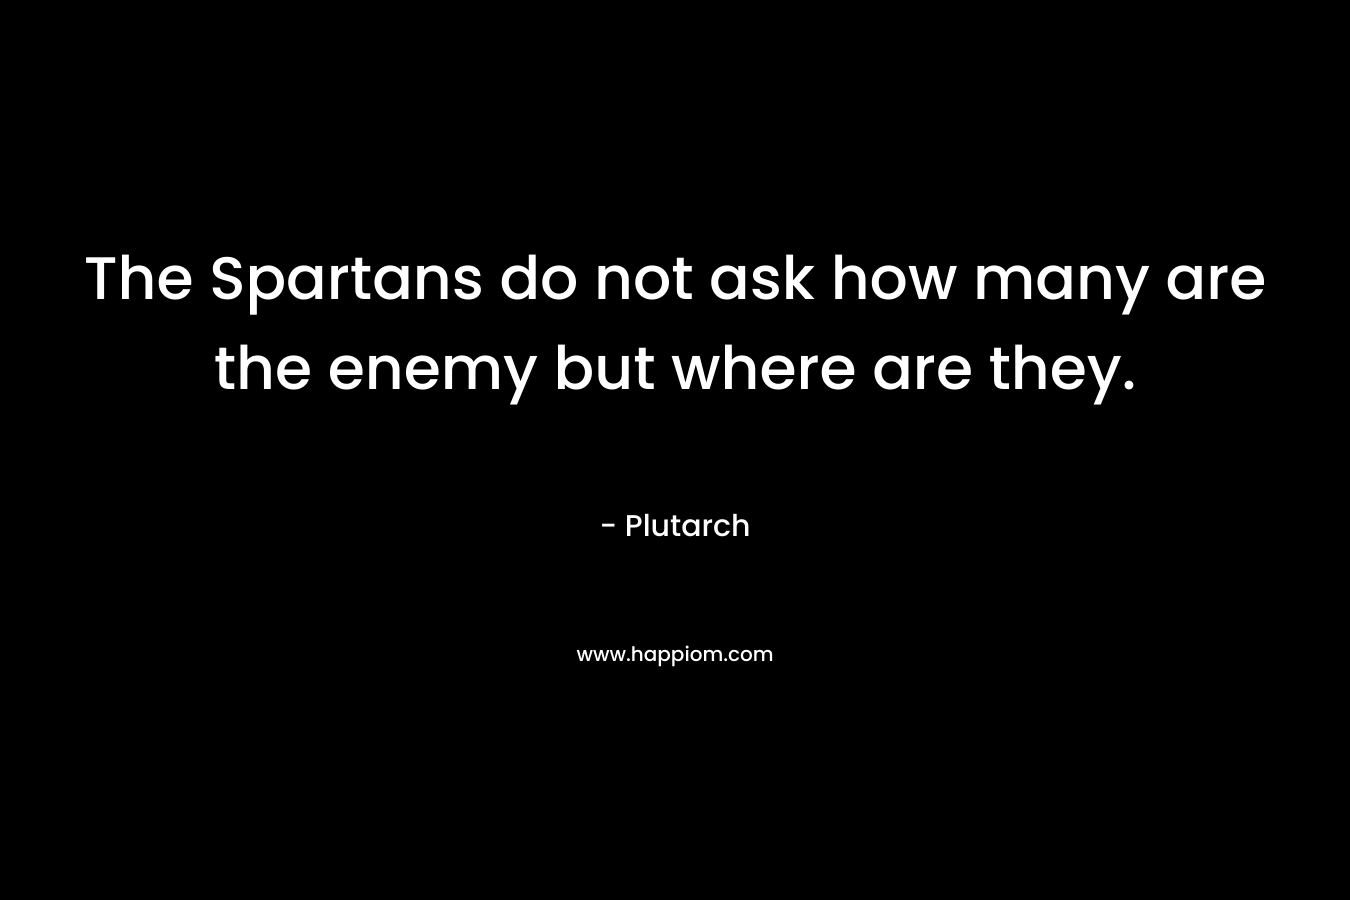 The Spartans do not ask how many are the enemy but where are they.